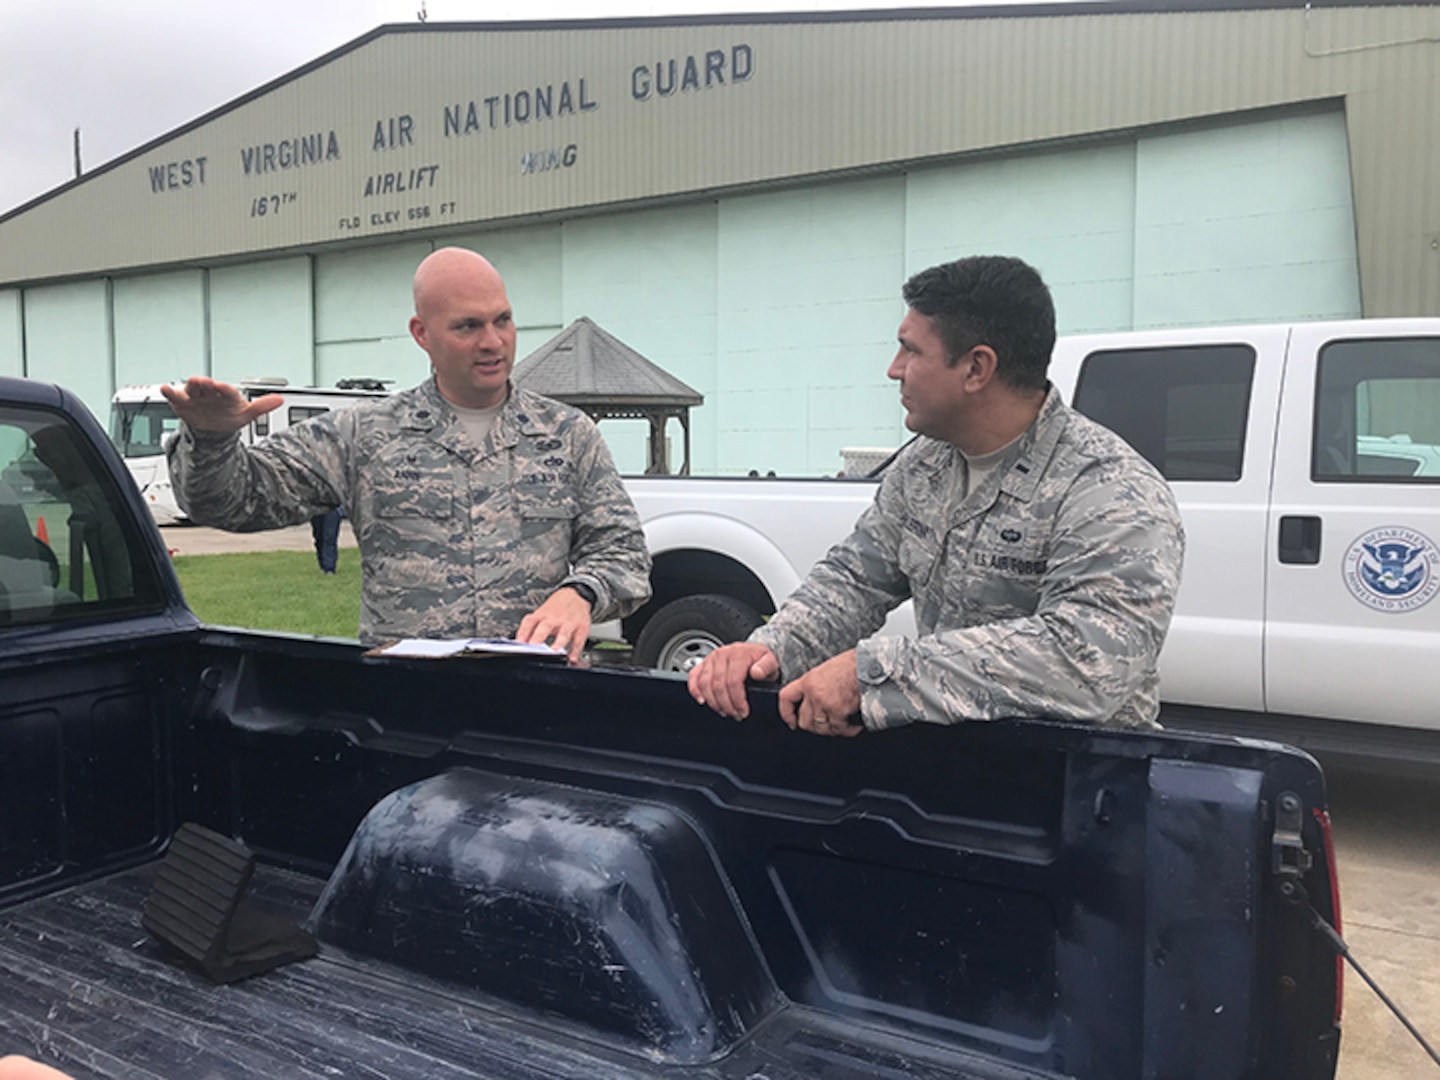 The 167th Airlift Wing, West Virginia Air National Guard, is serving as a staging area for the Federal Emergency Management Agency ahead of Hurricane Florence’s expected impact along the East Coast this week. About 70 trailers full of food, water, blankets, cots, tents and fuel will be on stand-by, ready to mobilize as needed from the Martinsburg, W.Va., base.